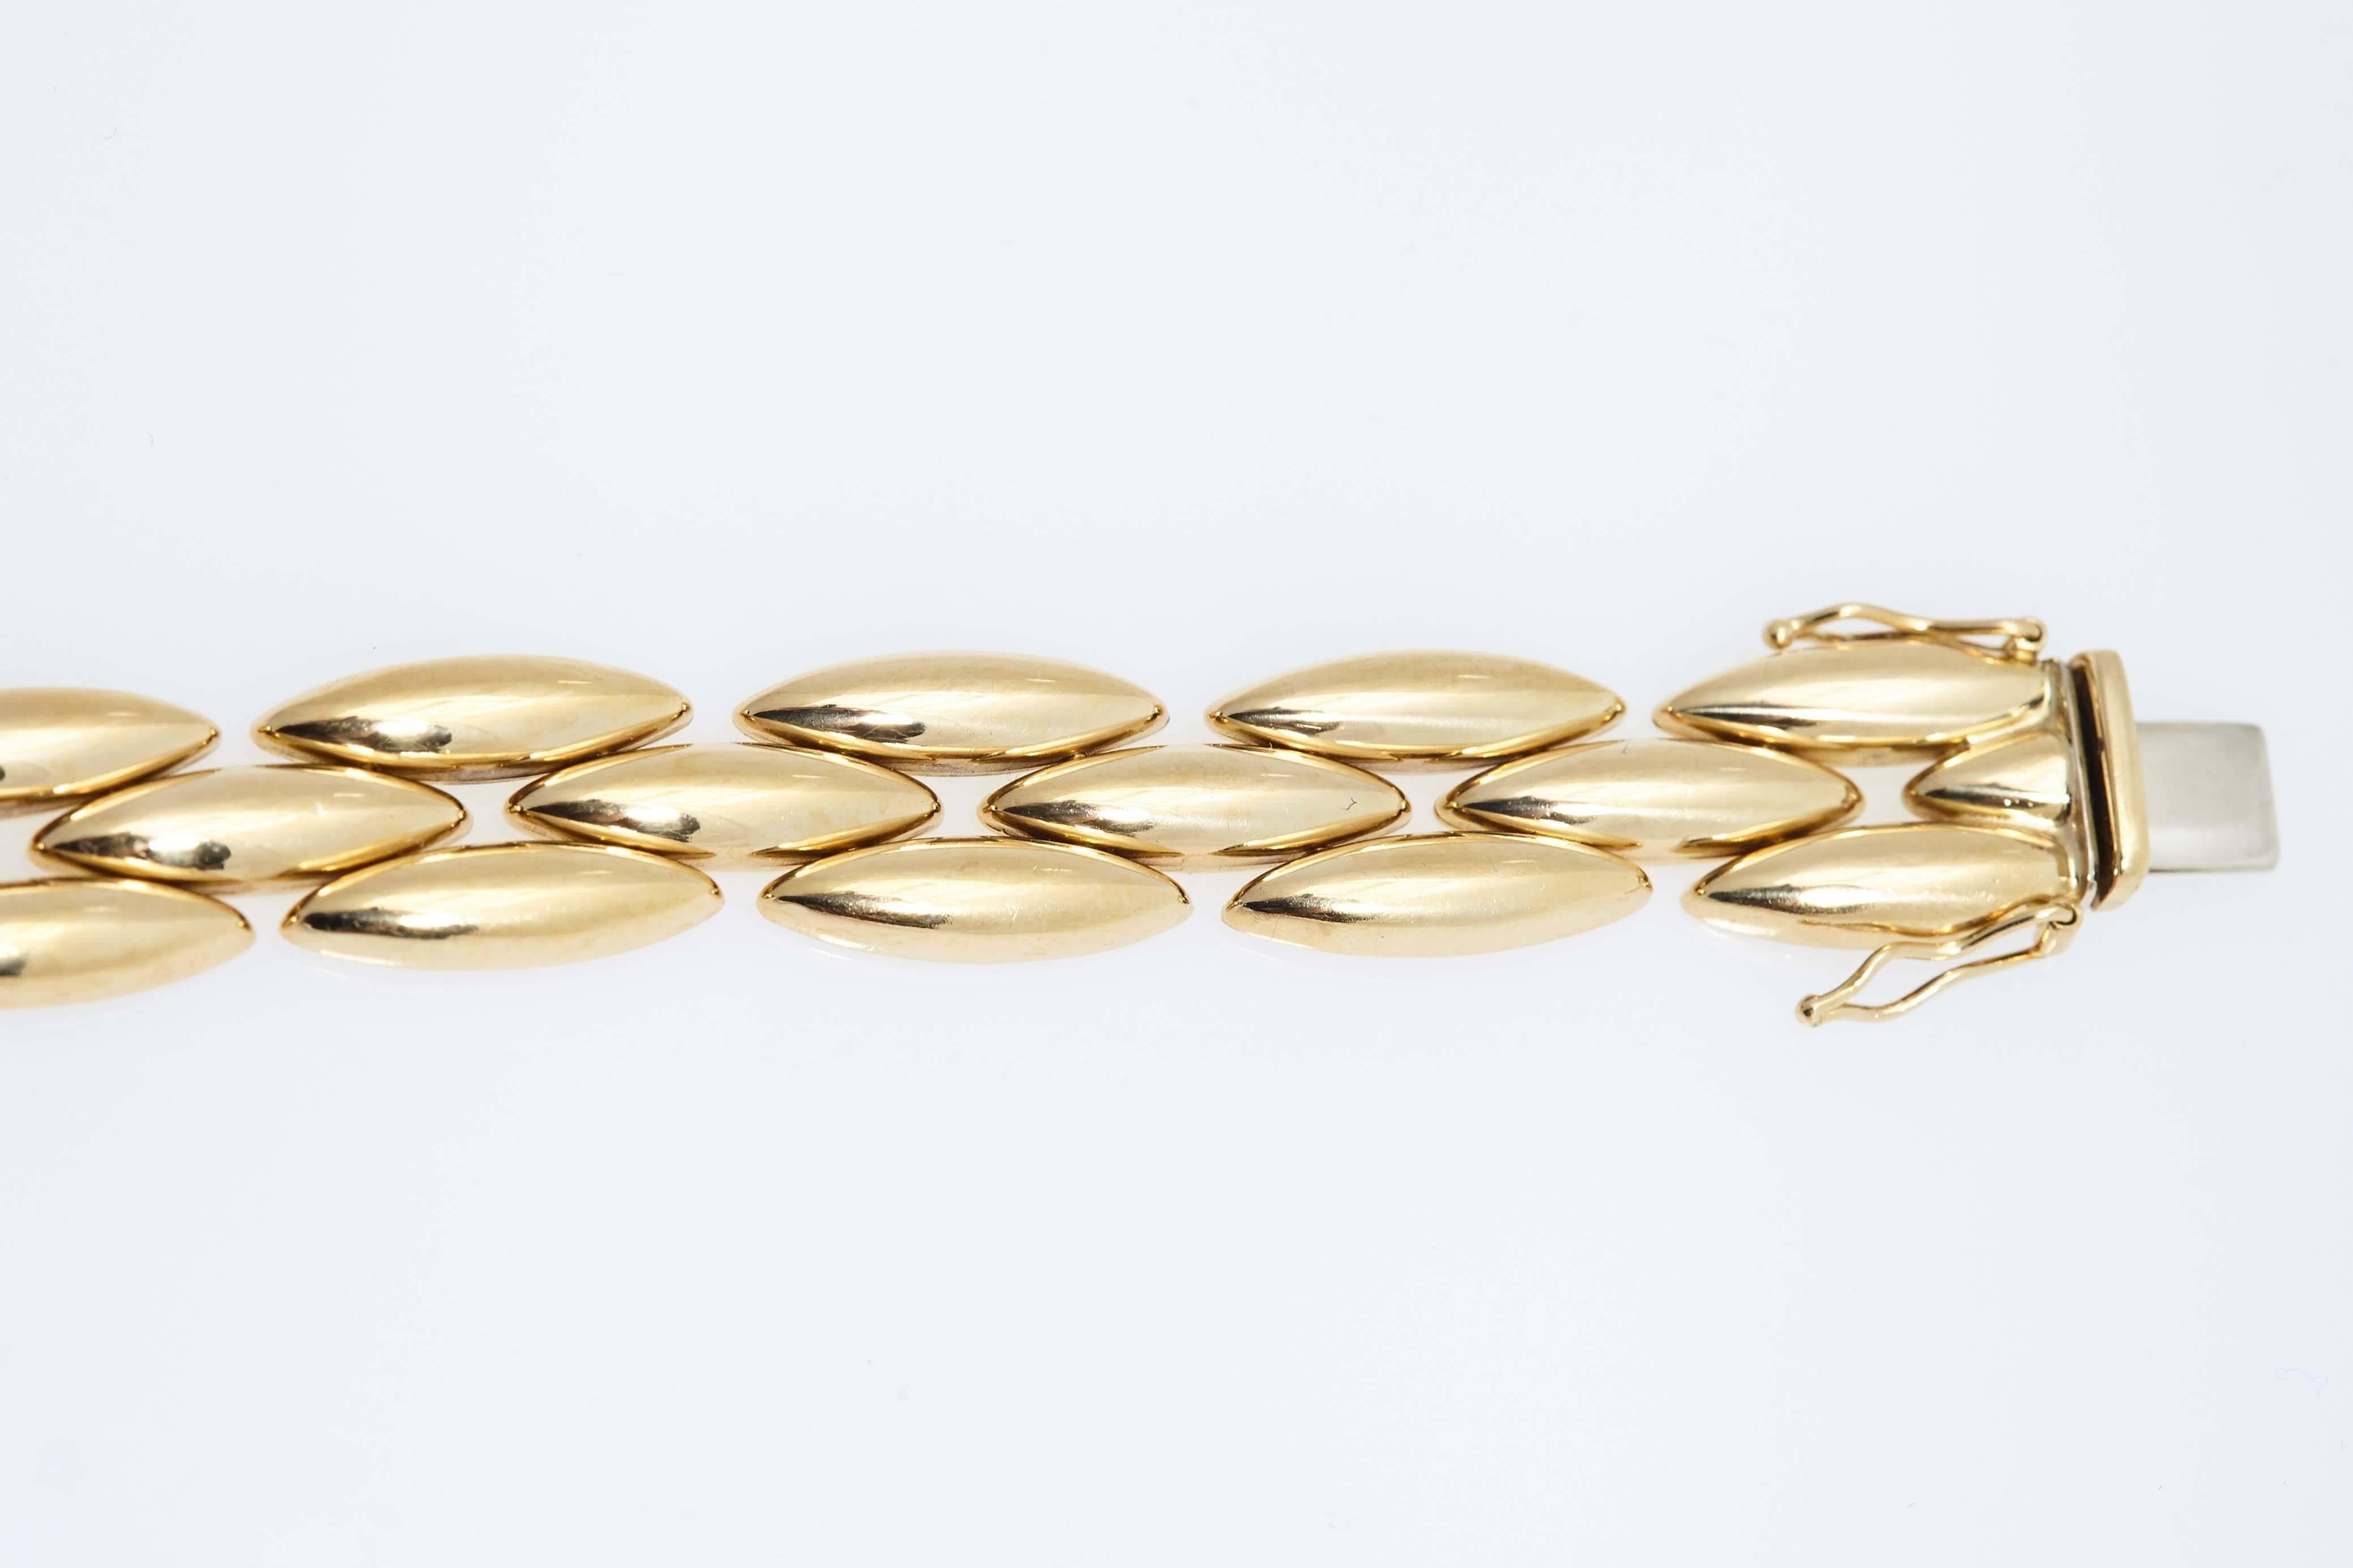 Cartier 18 karat yellow gold flat link chain bracelet. The bracelet is approximately 7.5 inches long and is stamped "Cartier, 750".